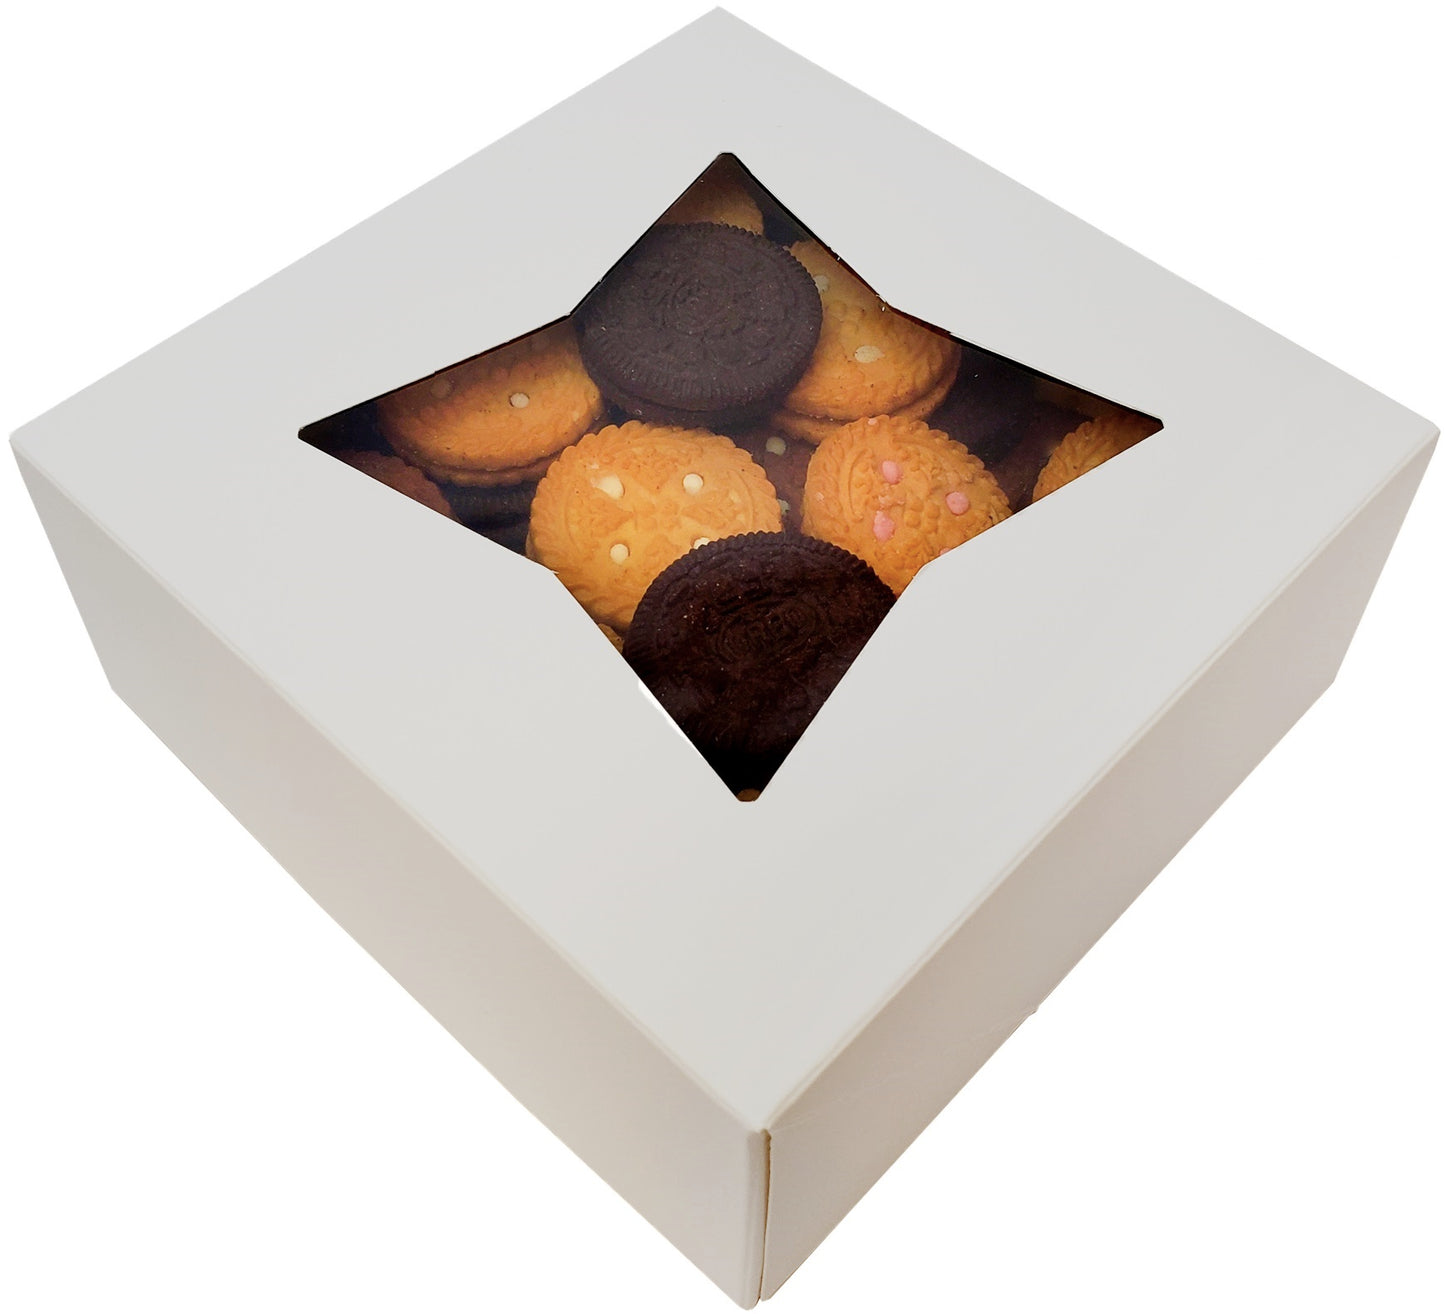 BAKELUV 6x6x2.5” White Bakery Boxes with Window